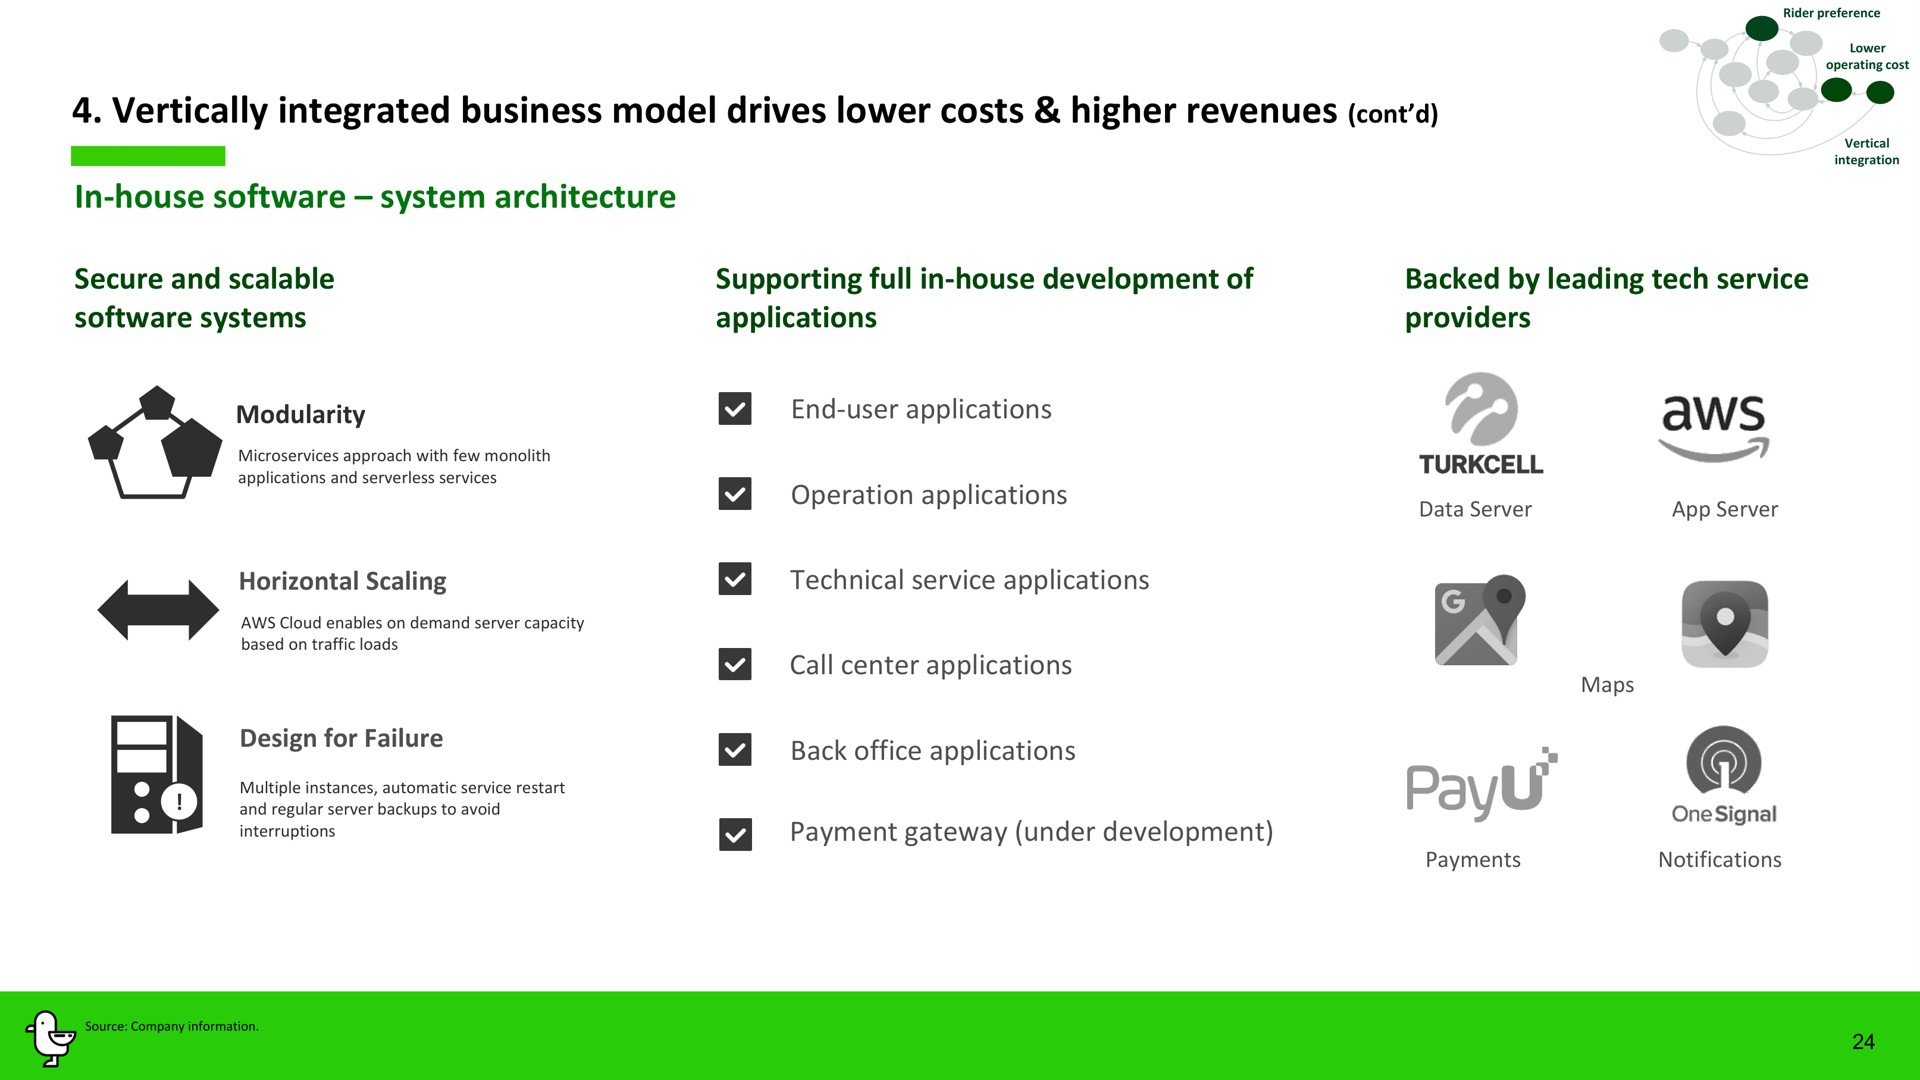 vertically integrated business model drives lower costs higher revenues in house system architecture | Marti